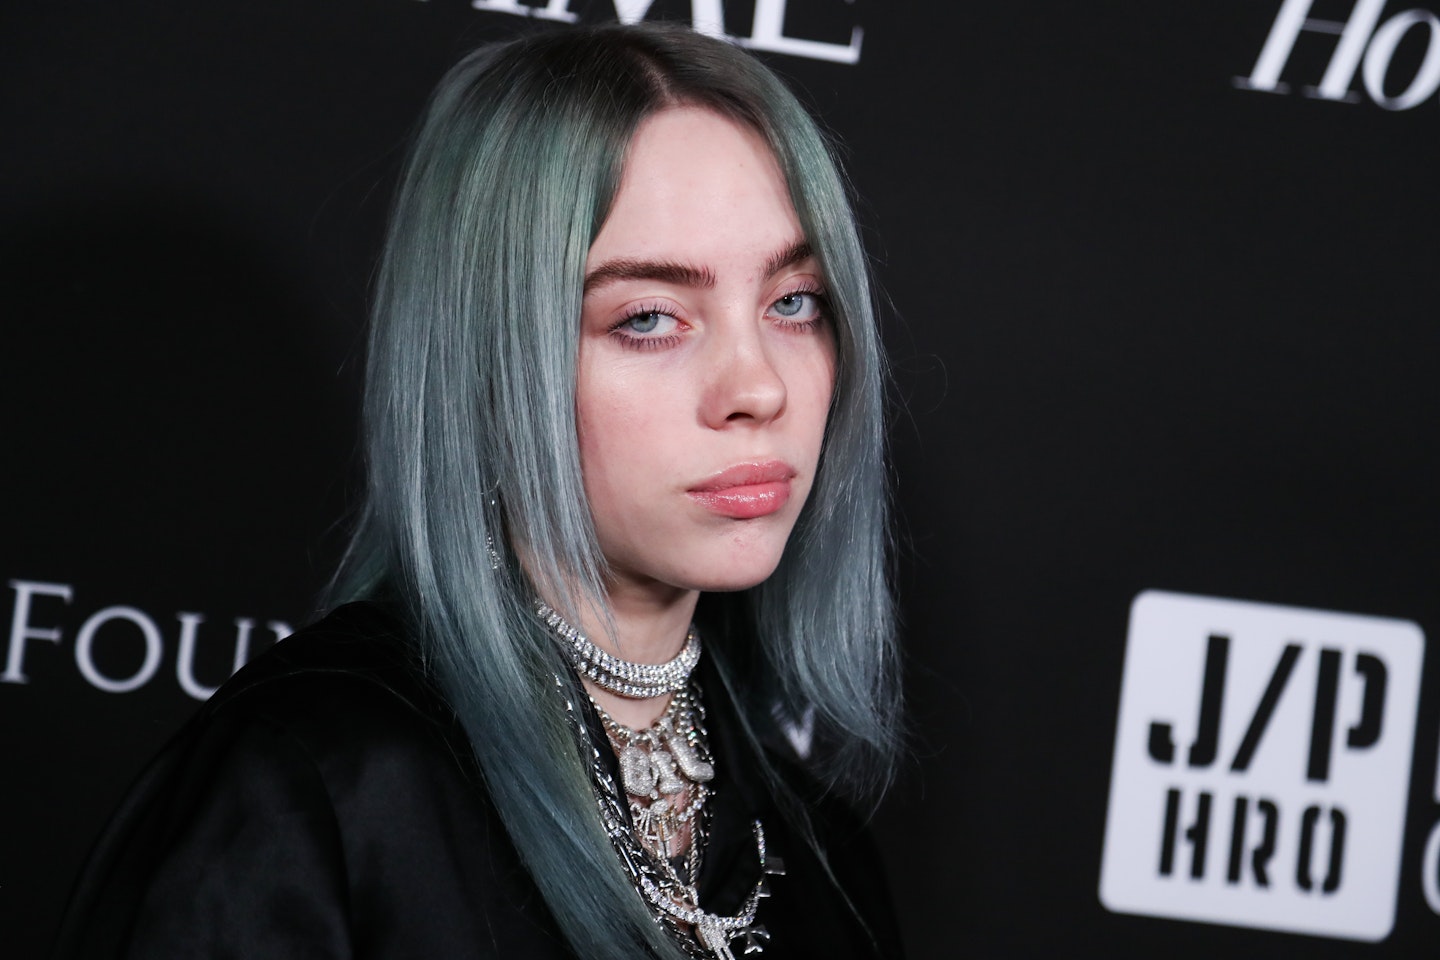 Can't Decide How To Feel About Billie Eilish's New Look? You're Not Alone